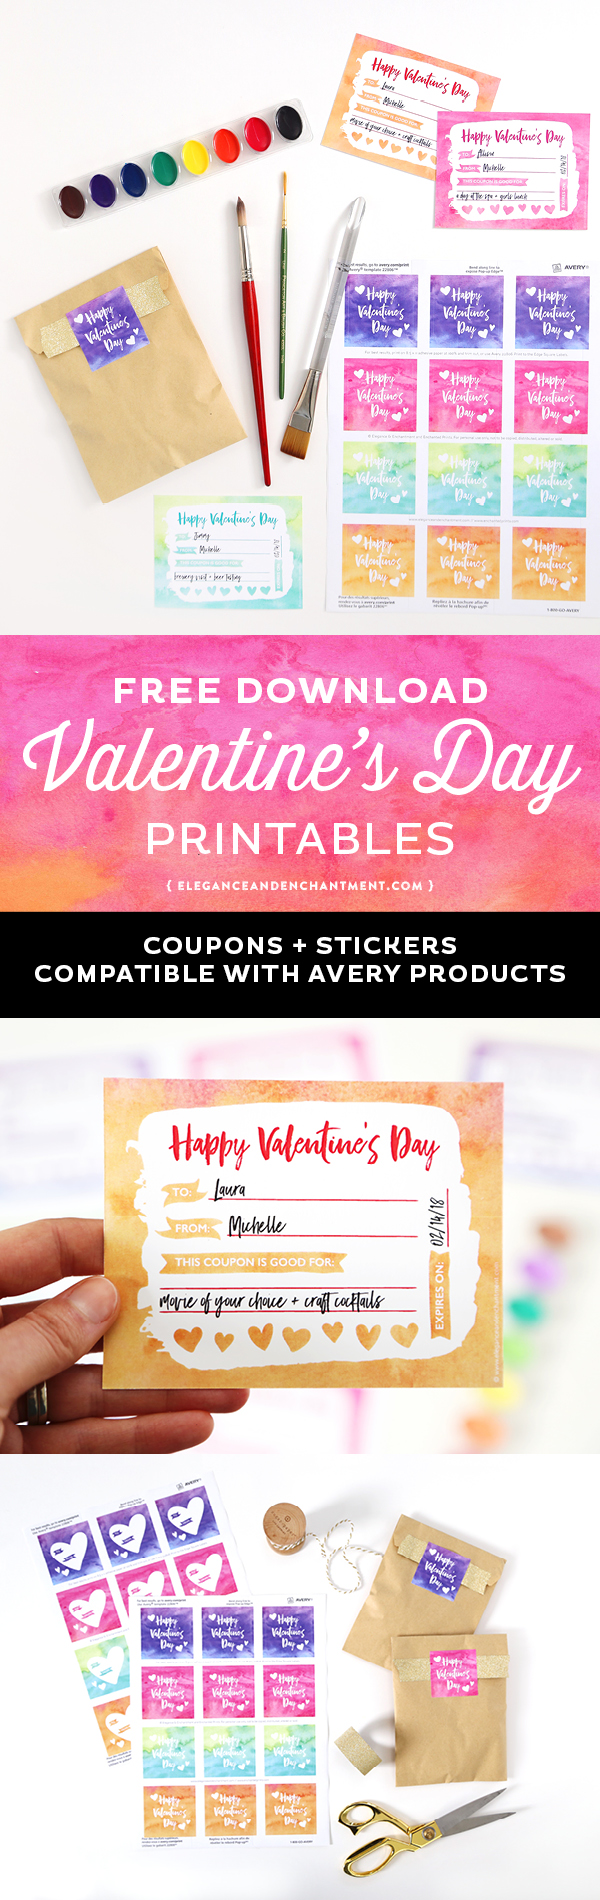 Make Valentine’s Day Gift giving easy with these free printables in a pretty watercolor style. Includes printable Valentine’s Day coupons + two types of stickers in four different colors. Compatible with Avery Products 22806 and 8387 for easy printing! Designs from Elegance and Enchantment. 